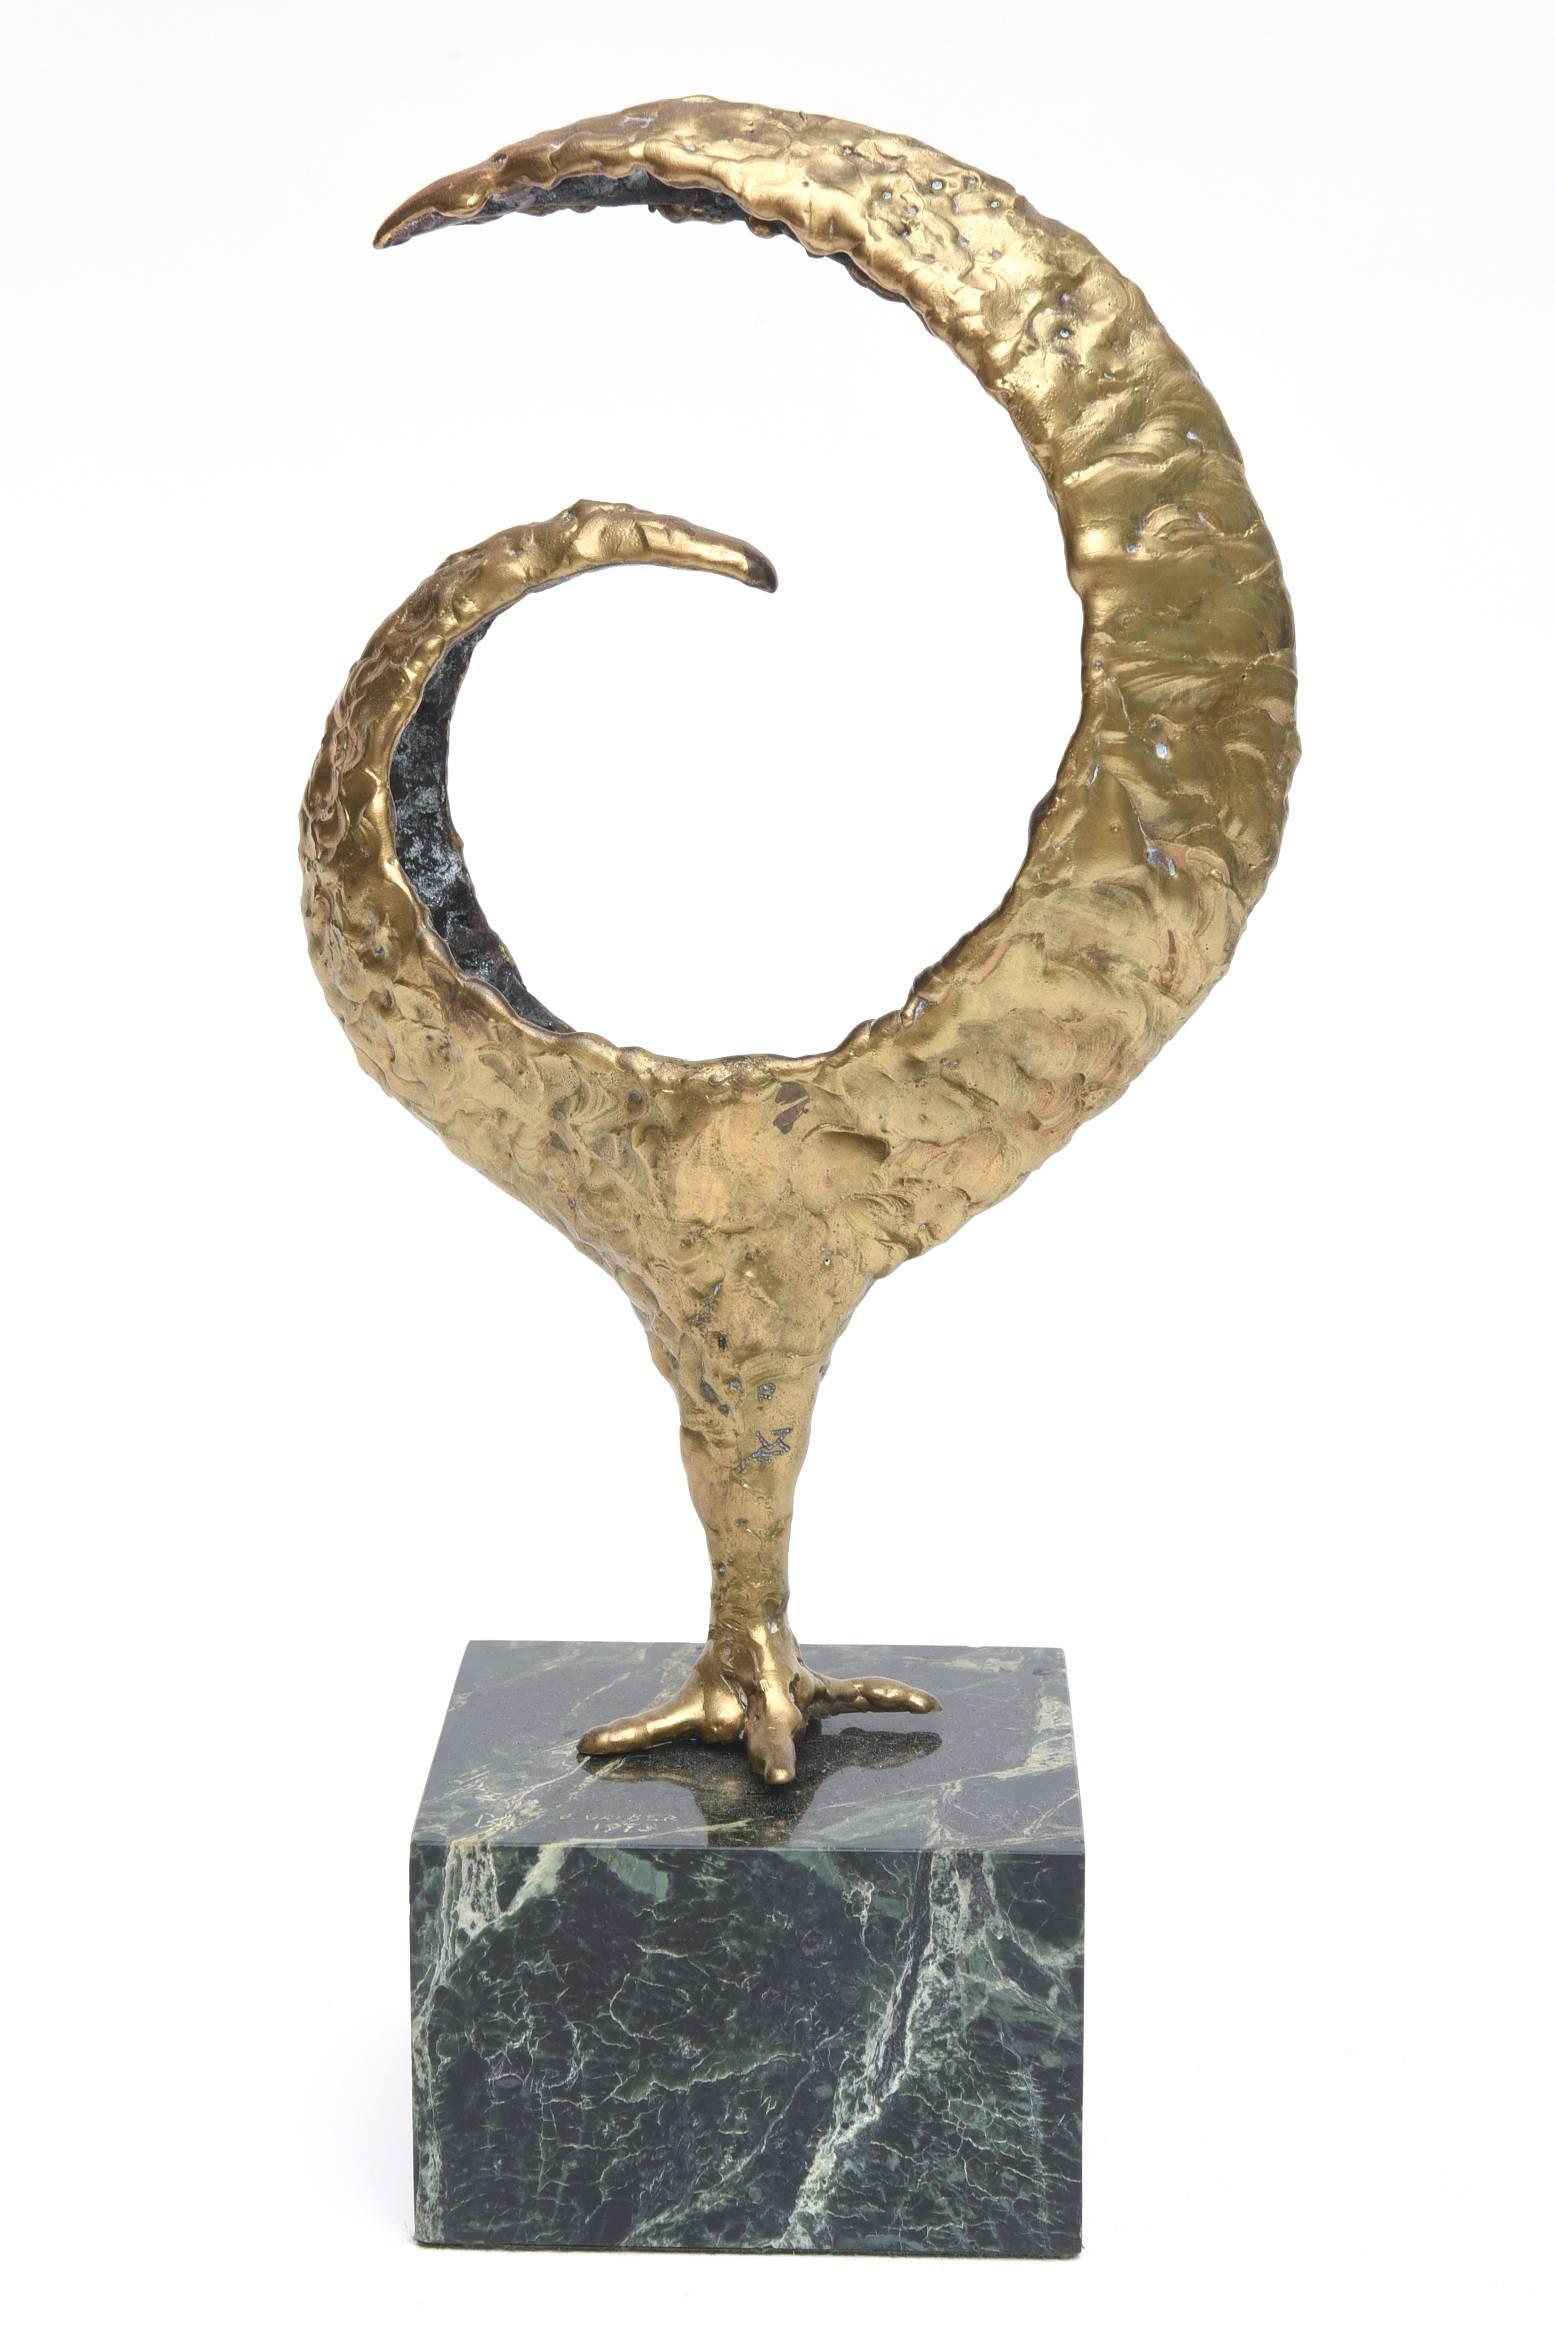 This heavy molten bronze question mark, bird or chicken sculpture has the traccia feet that is reminiscent on the coveted Meret Oppeneheim table. It sits in the original variegated green and black marble base with a bronze pole. The sculpture is